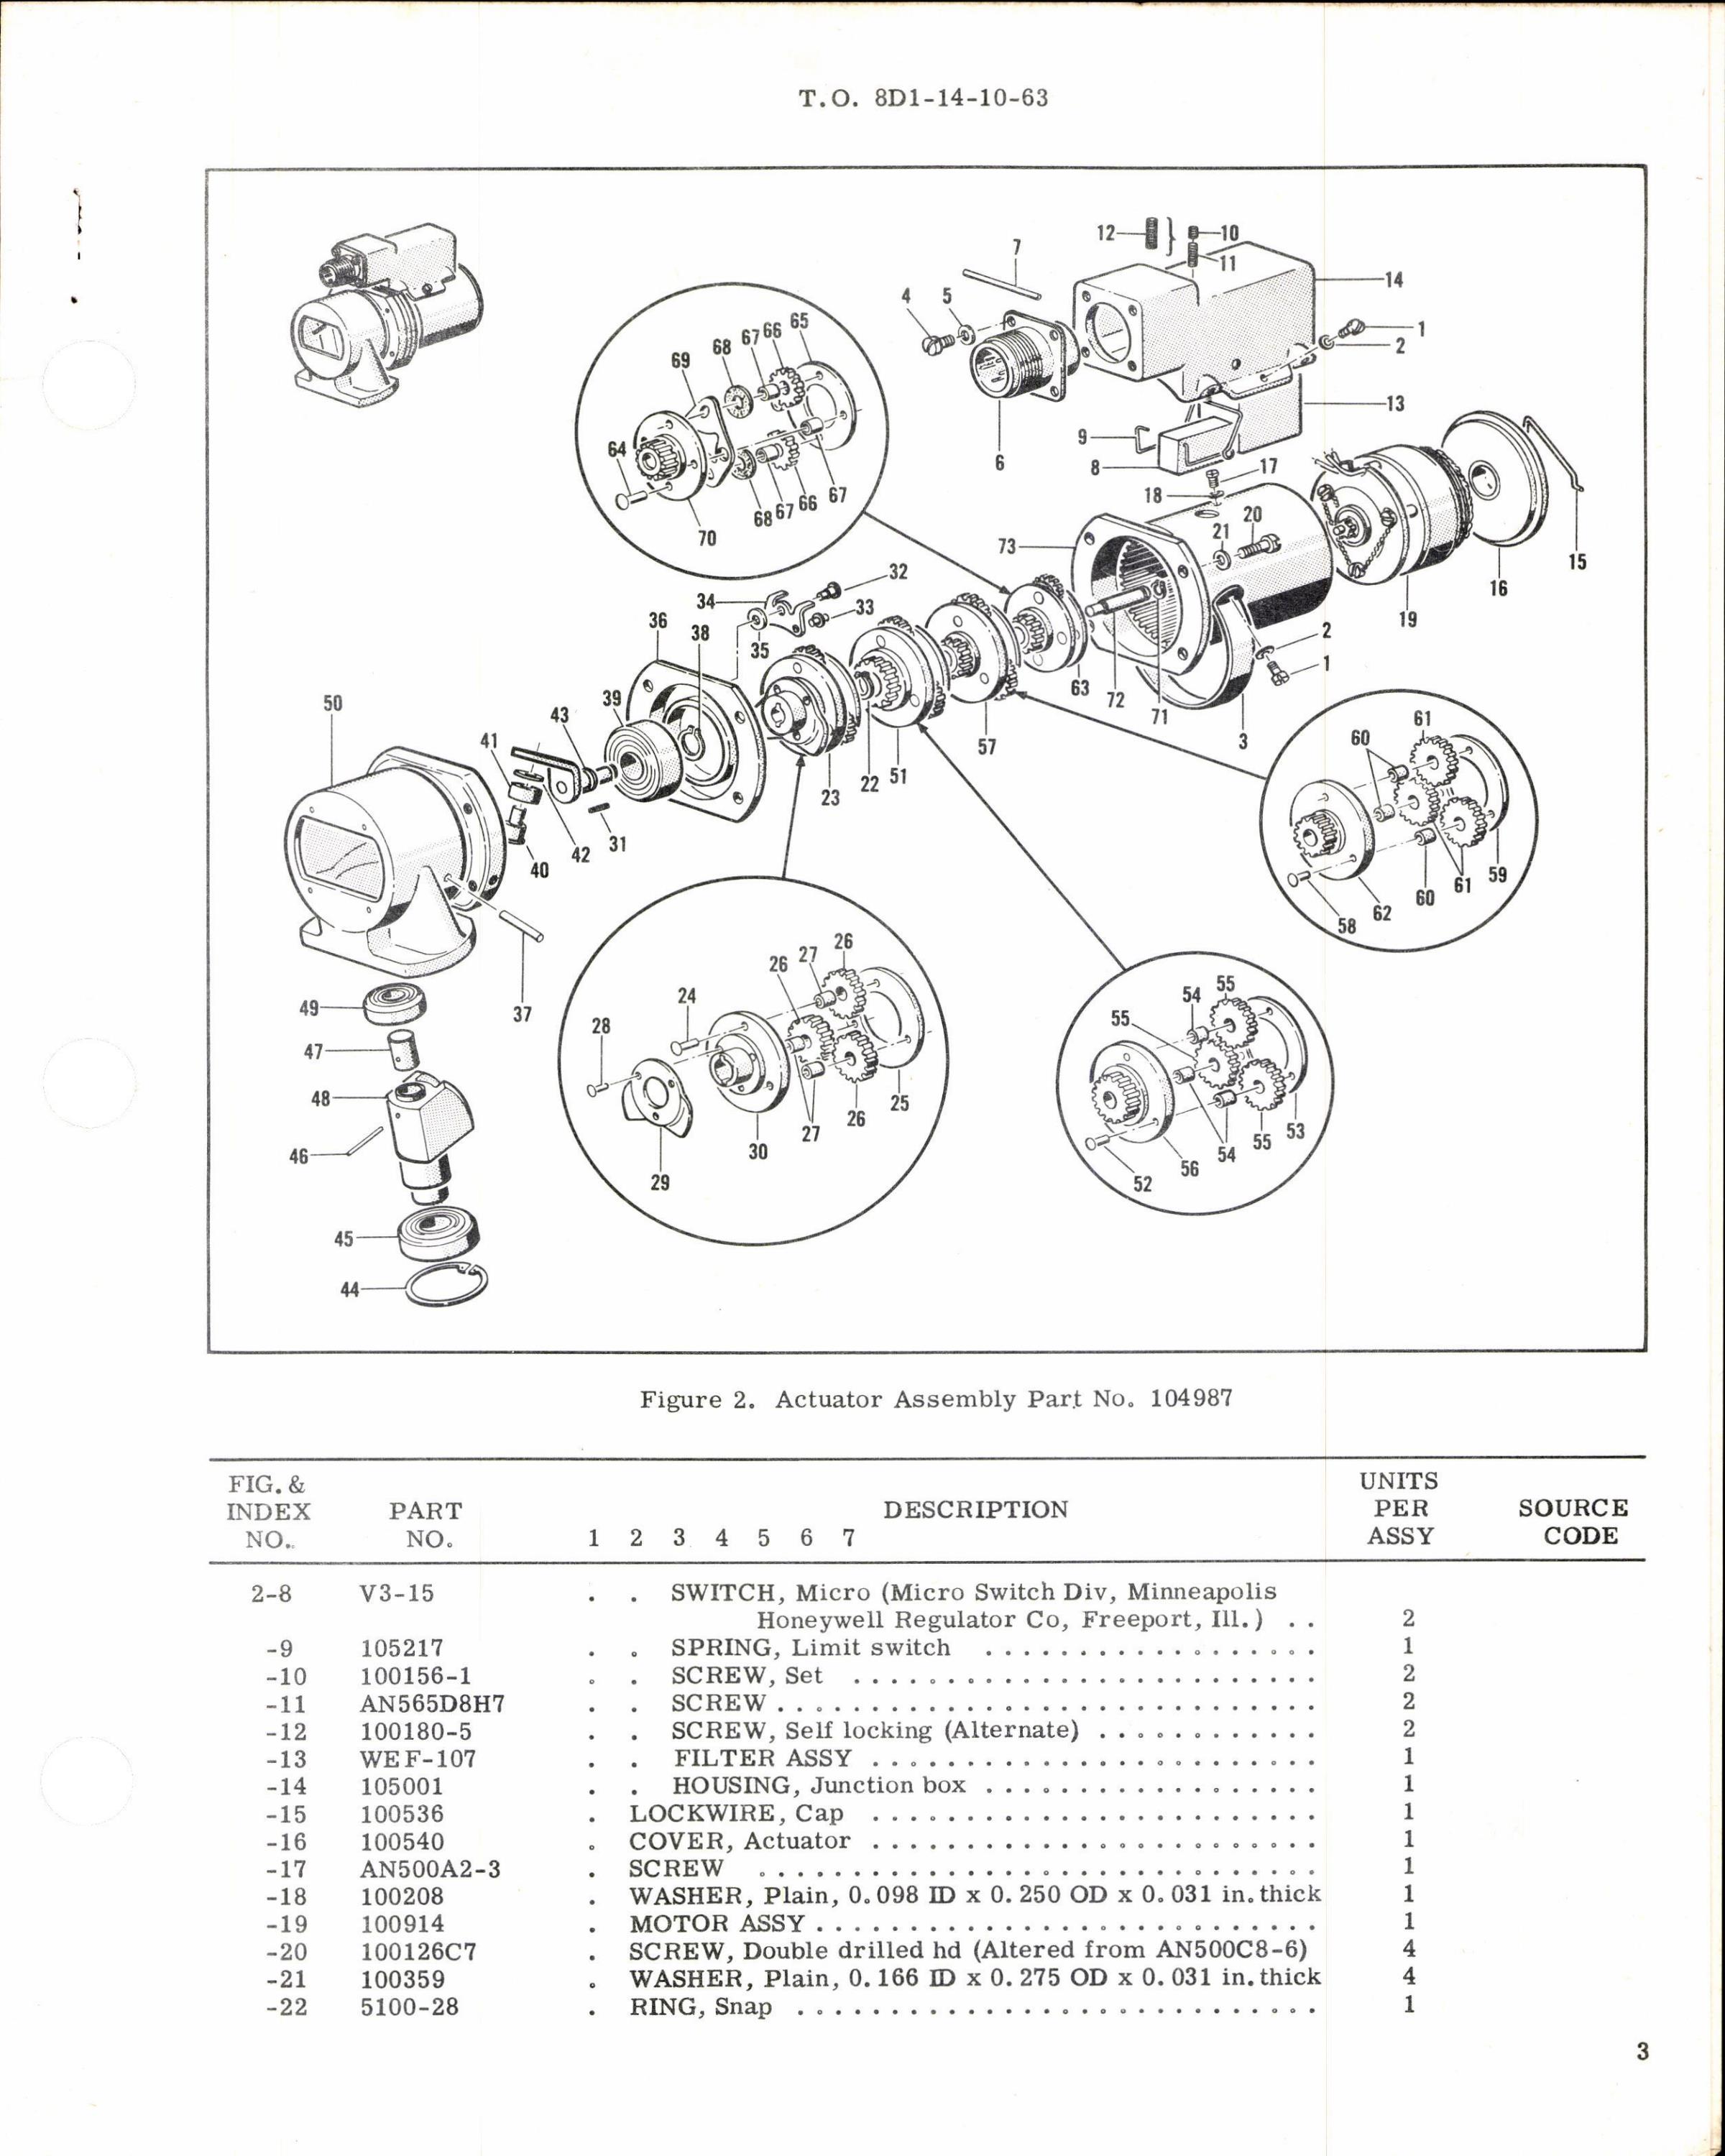 Sample page 3 from AirCorps Library document: Instructions w Parts Breakdown for Actuator Assembly Part 104987